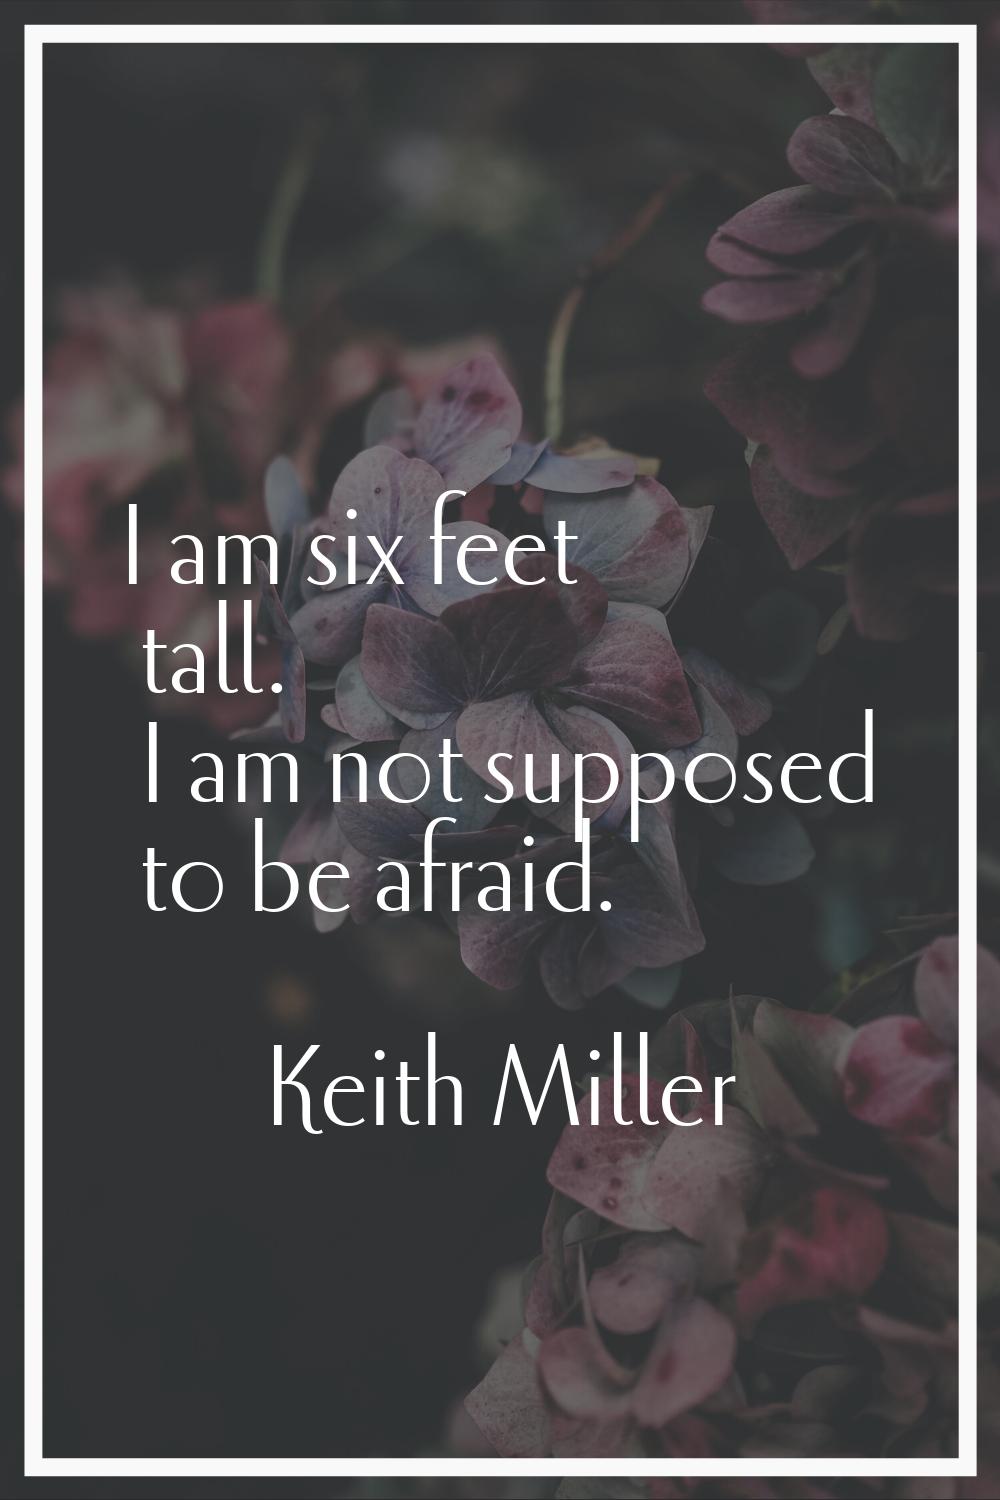 I am six feet tall. I am not supposed to be afraid.